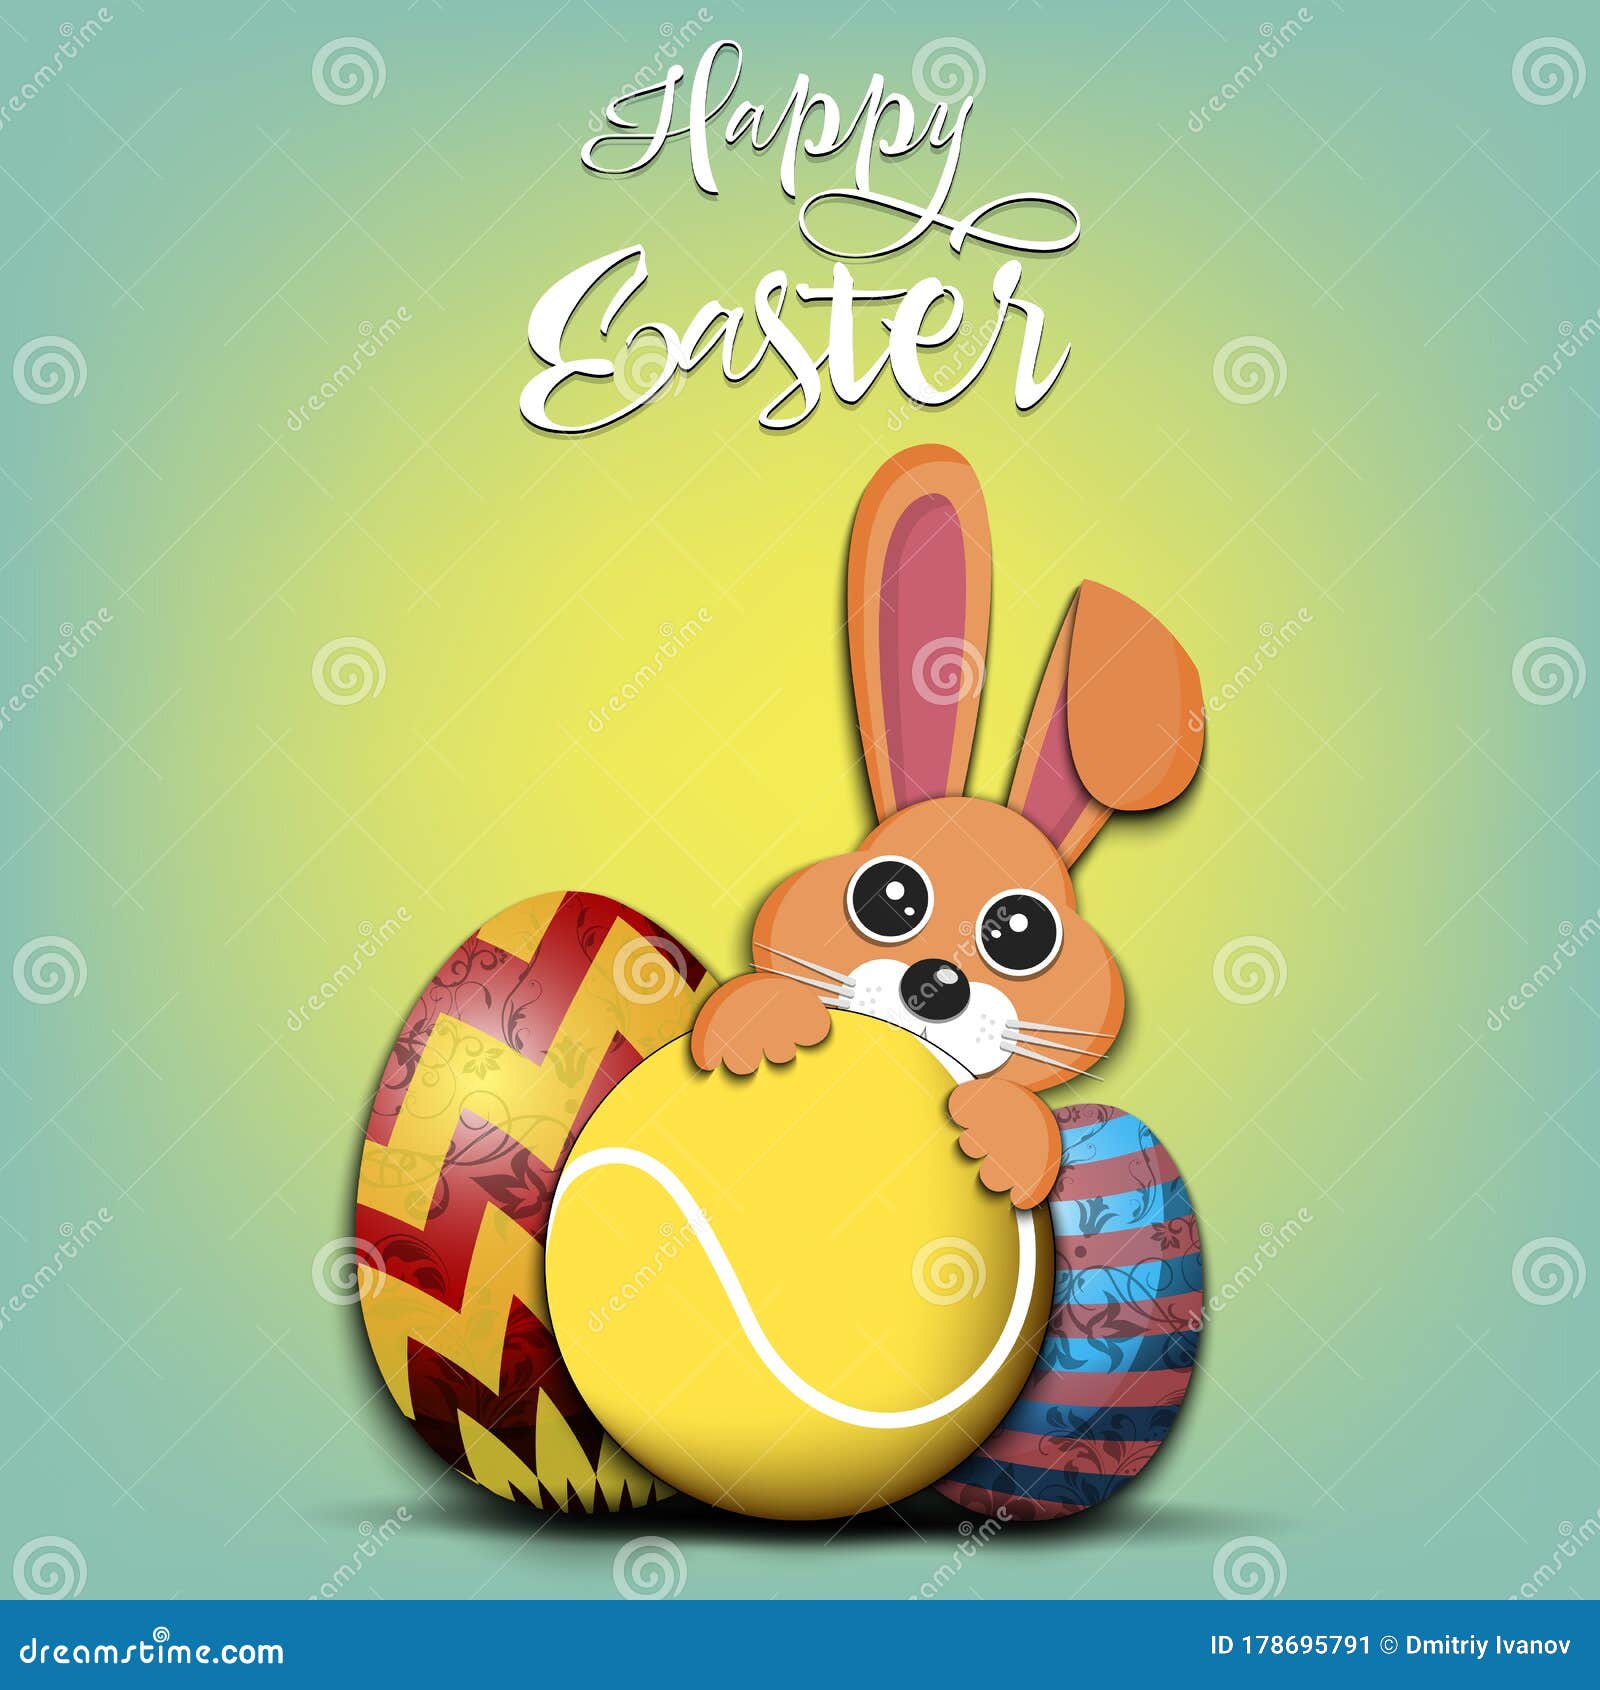 Happy Easter. Easter Eggs, Rabbit and Tennis Ball Stock Vector ...